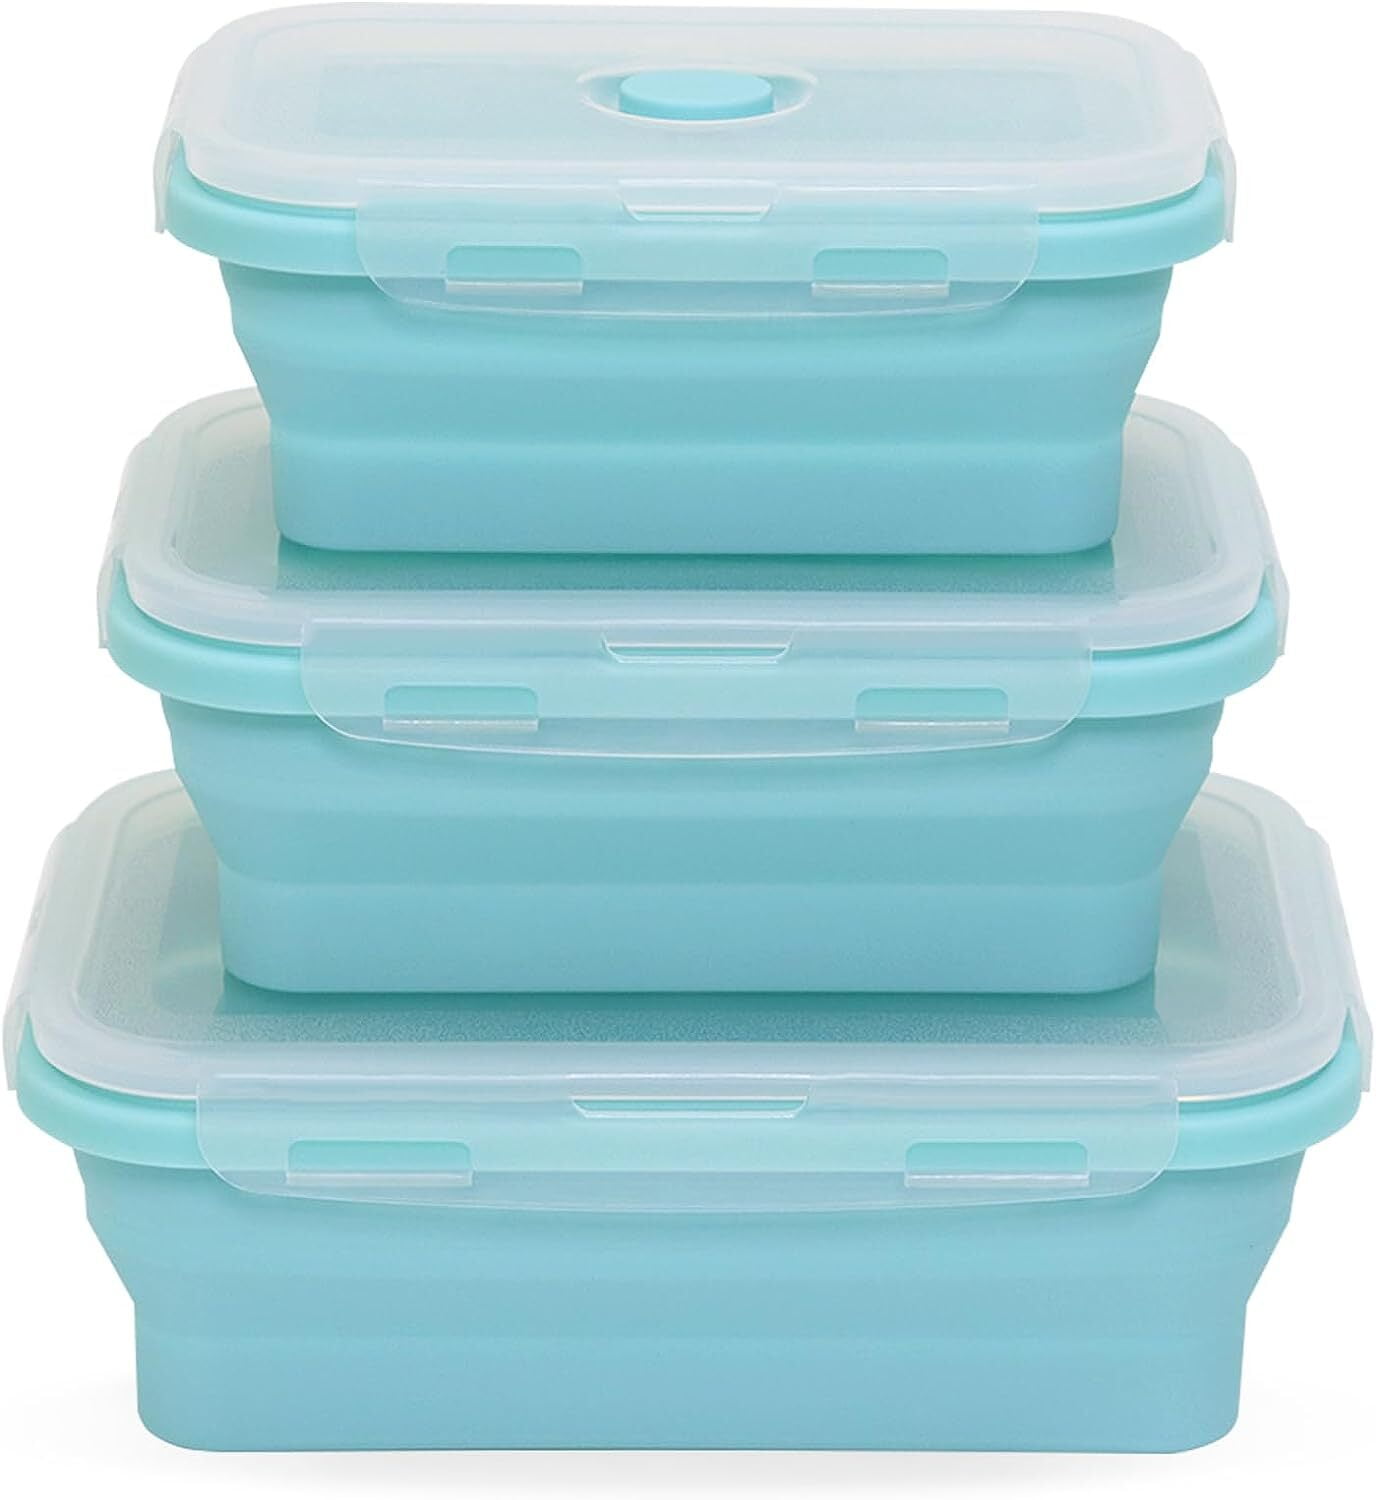 Collapsible Bowls For Camping, Set Of 4 Silicone Food Storage Containers  With Lids, Rv Storage And Organization, Rv Kitchen Accessories, Bpa Free,  Mic